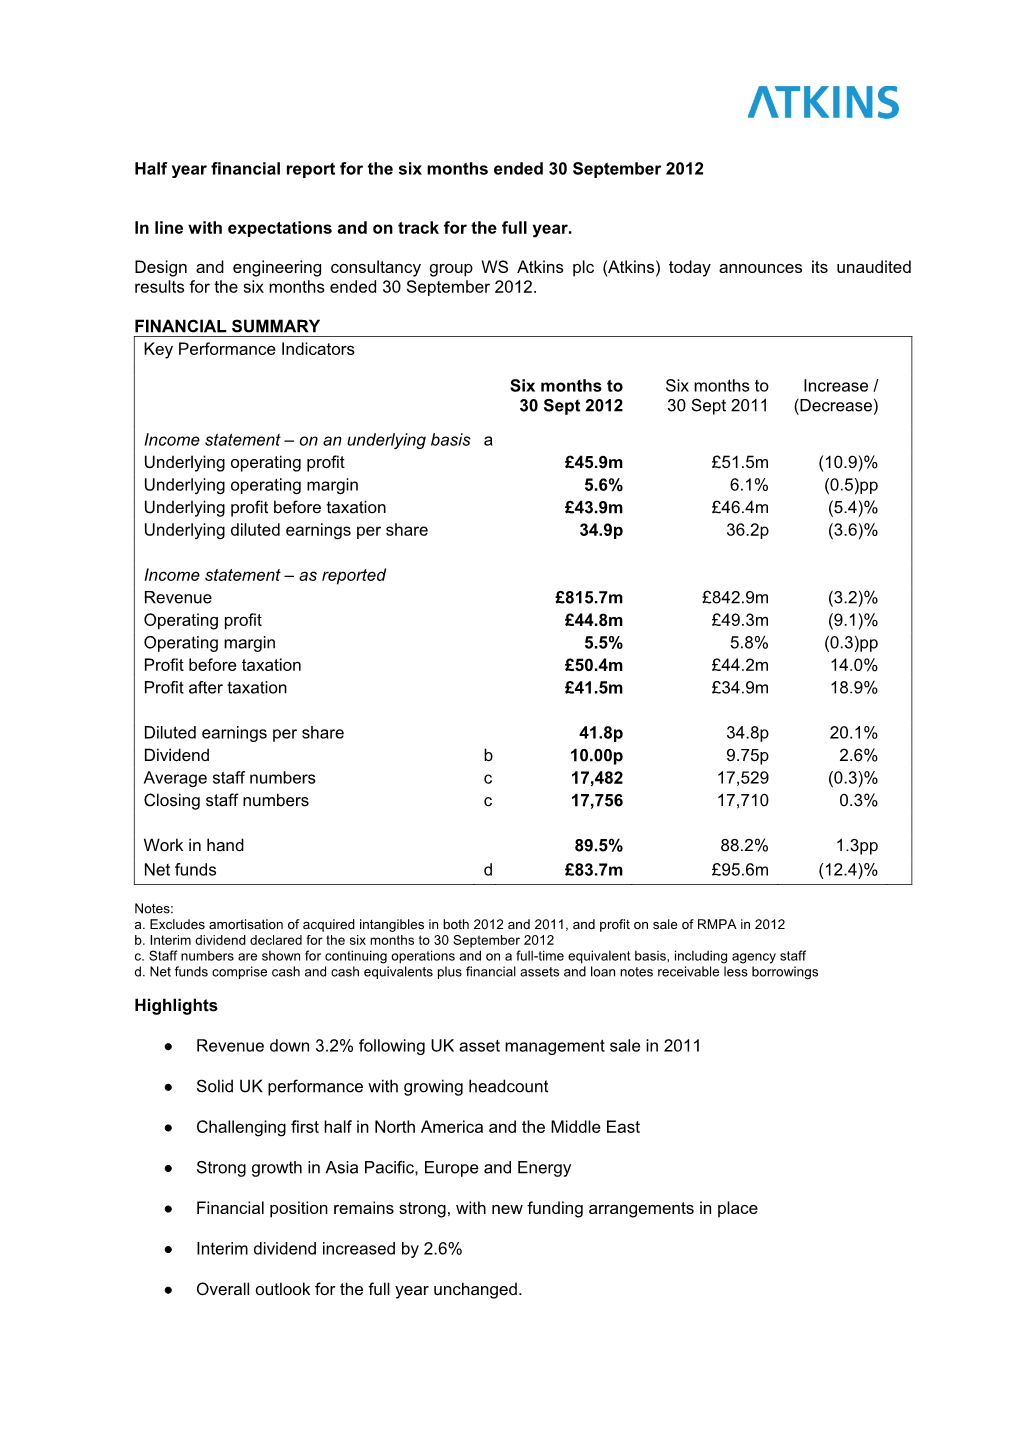 Half Year Financial Report for the Six Months Ended 30 September 2012